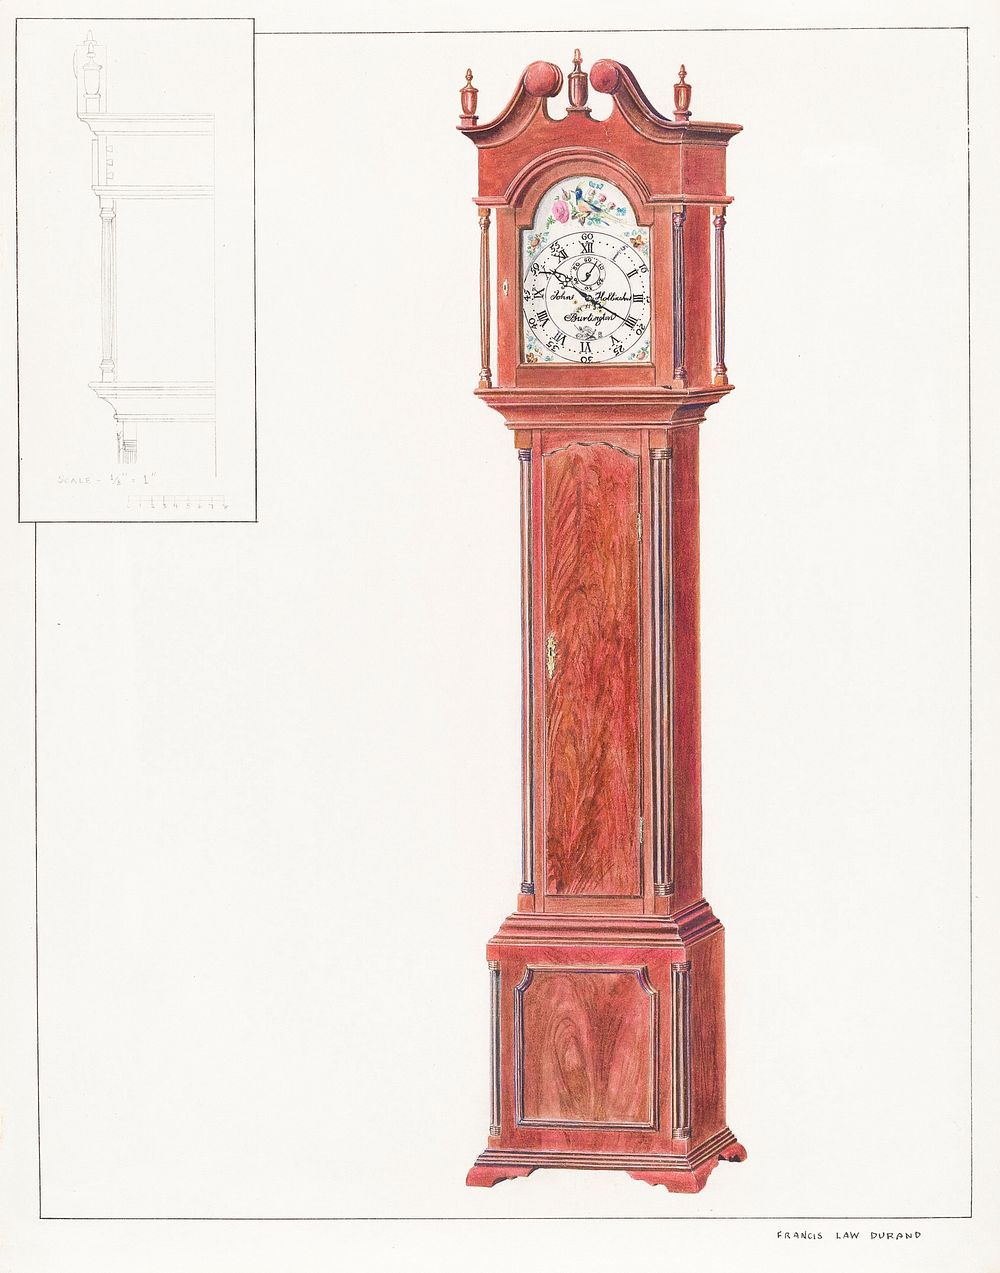 Grandfather's Clock (Timepiece) (c. 1937) by Francis Law Durand. Original from The National Gallery of Art. Digitally…